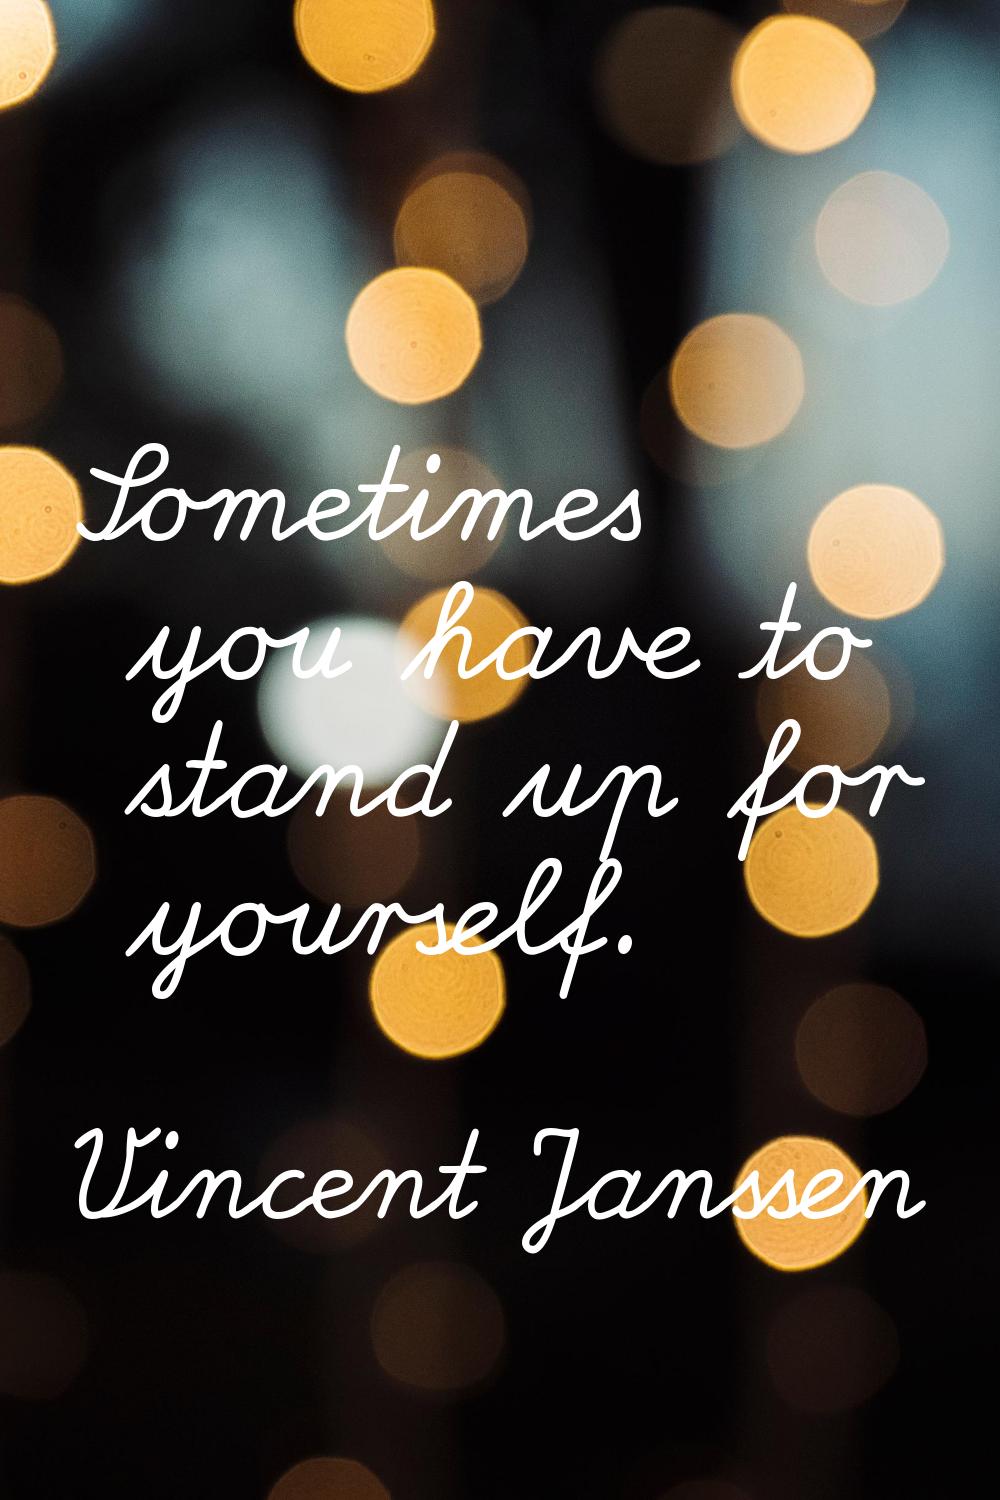 Sometimes you have to stand up for yourself.